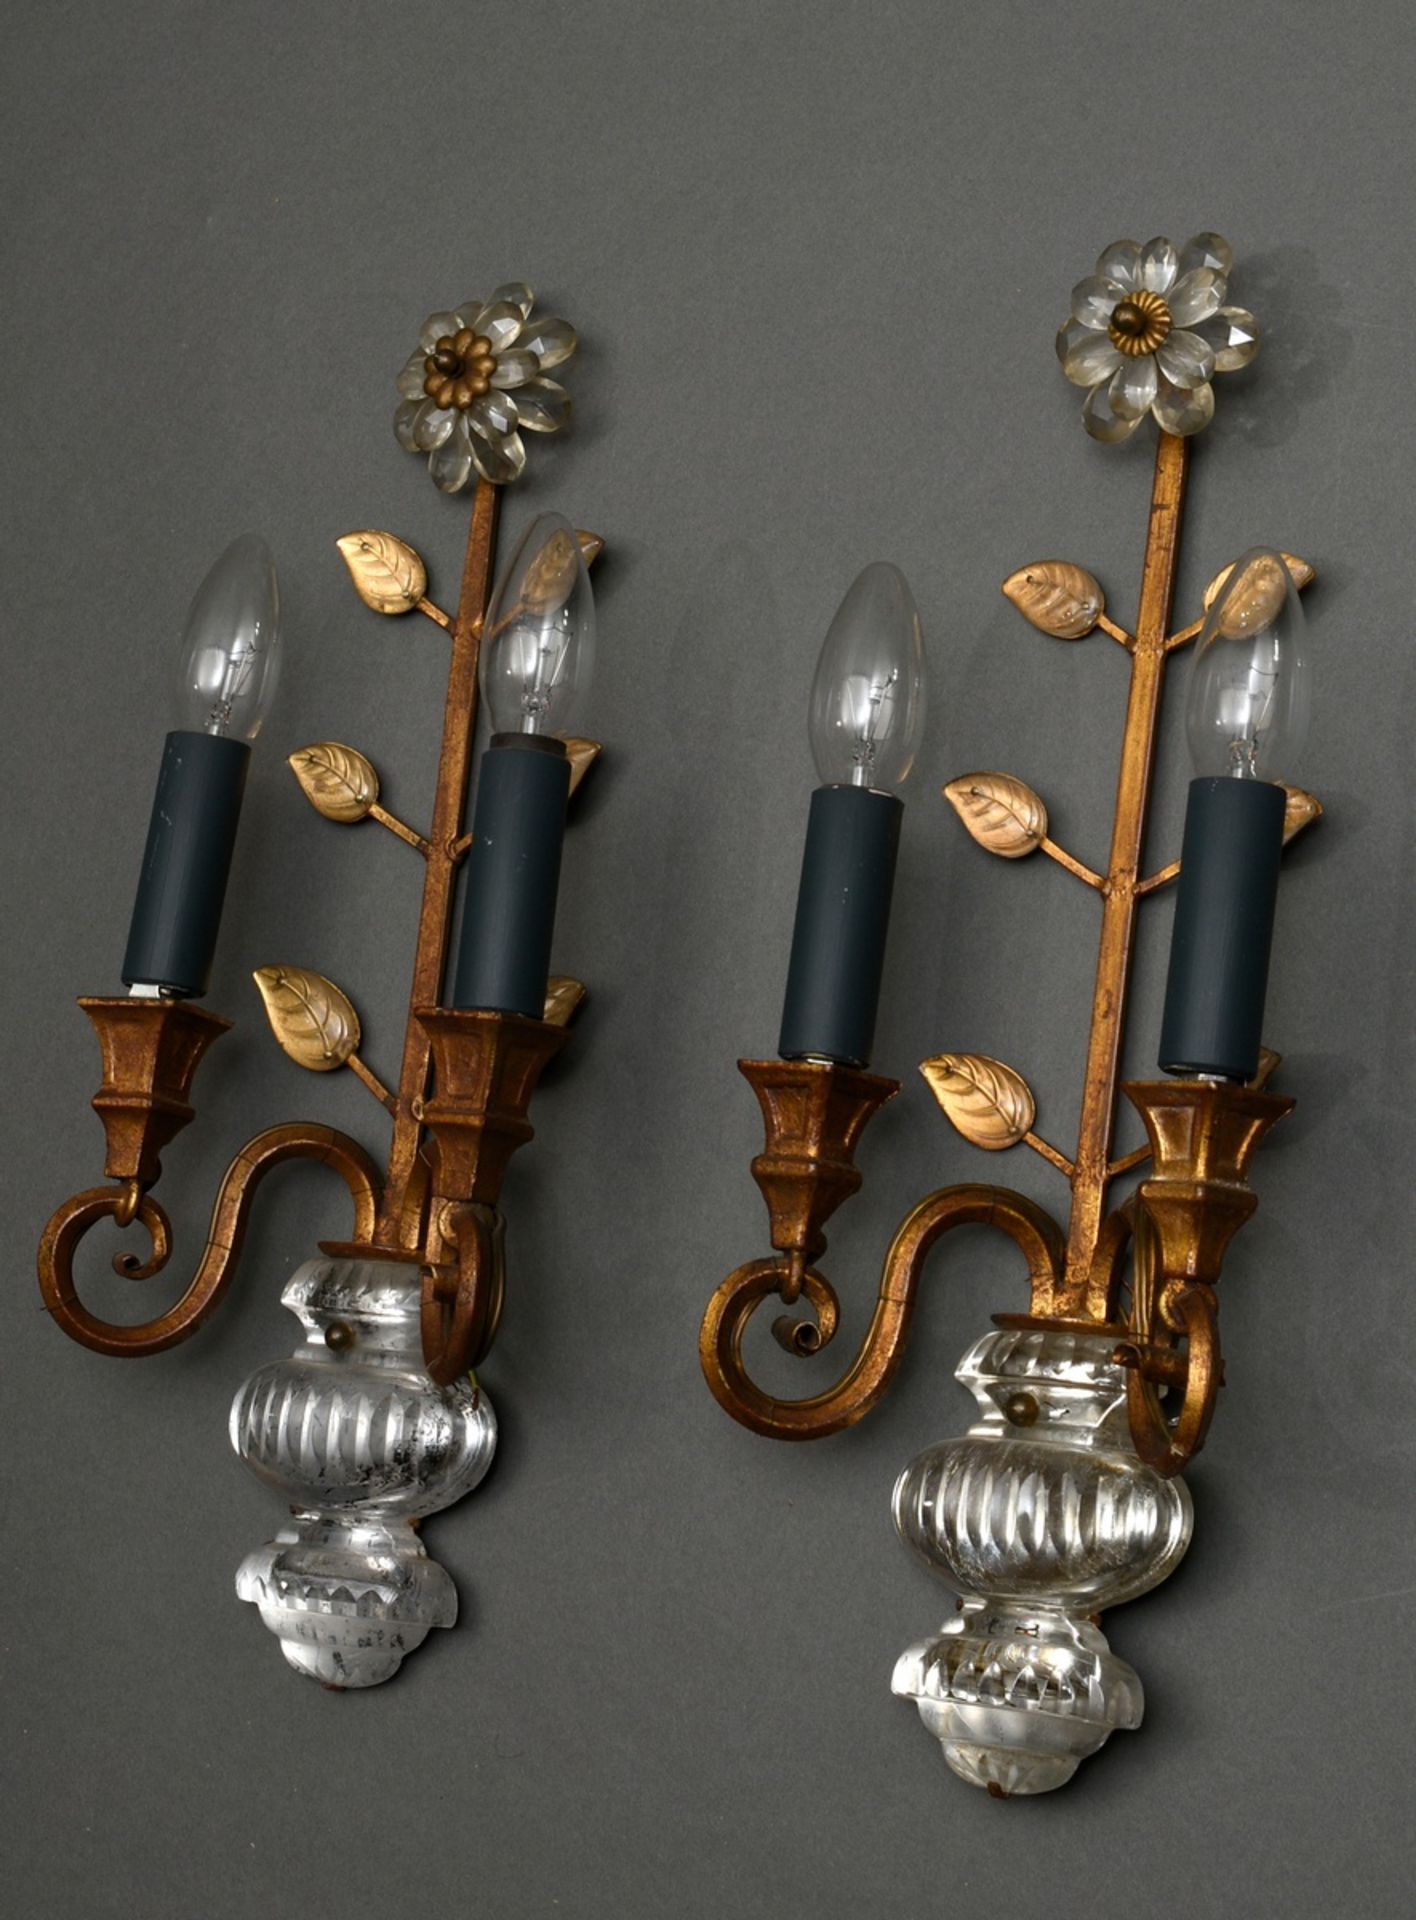 Pair of "Vases" wall lamps in Maison Baguès style, gilded metal with cut mirror glass and prismatic